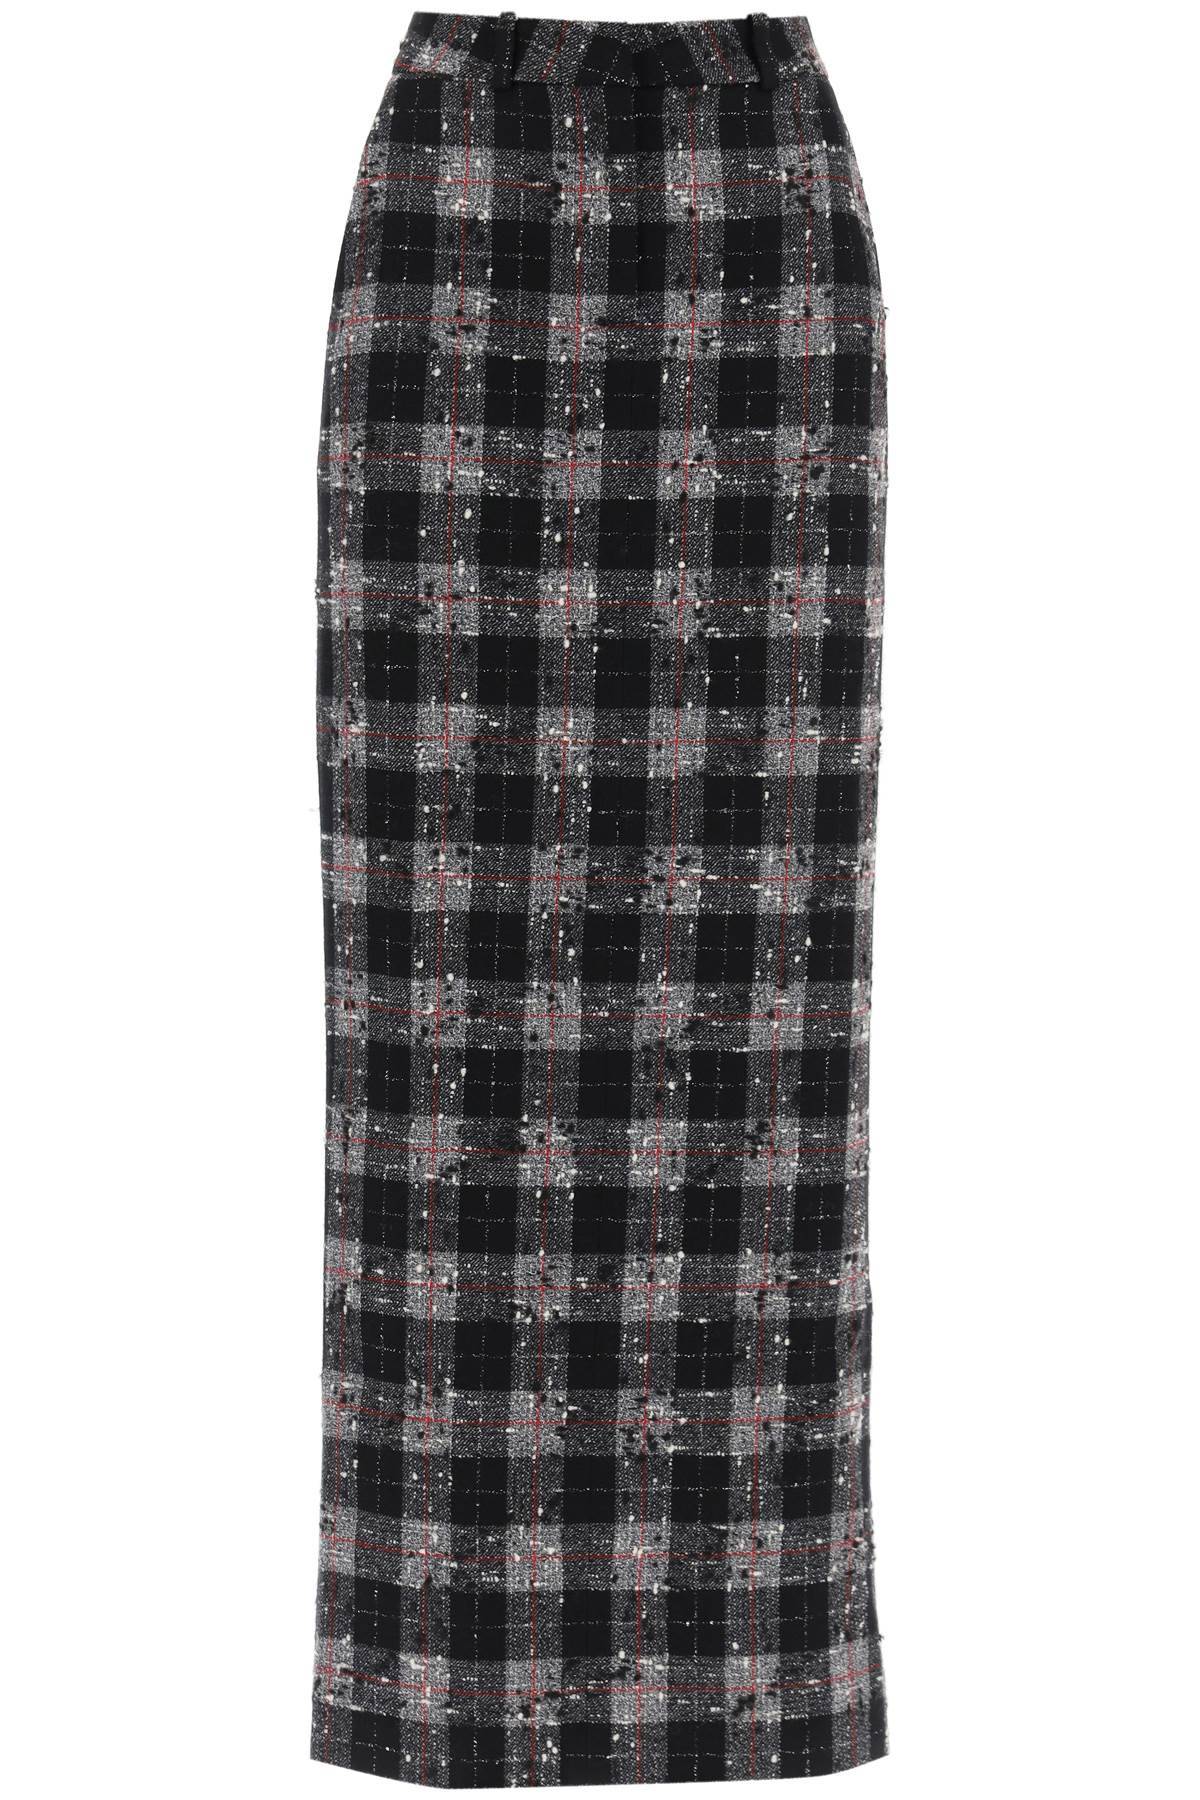 Alessandra Rich Maxi Skirt In Boucle' Fabric With Check Motif In Black